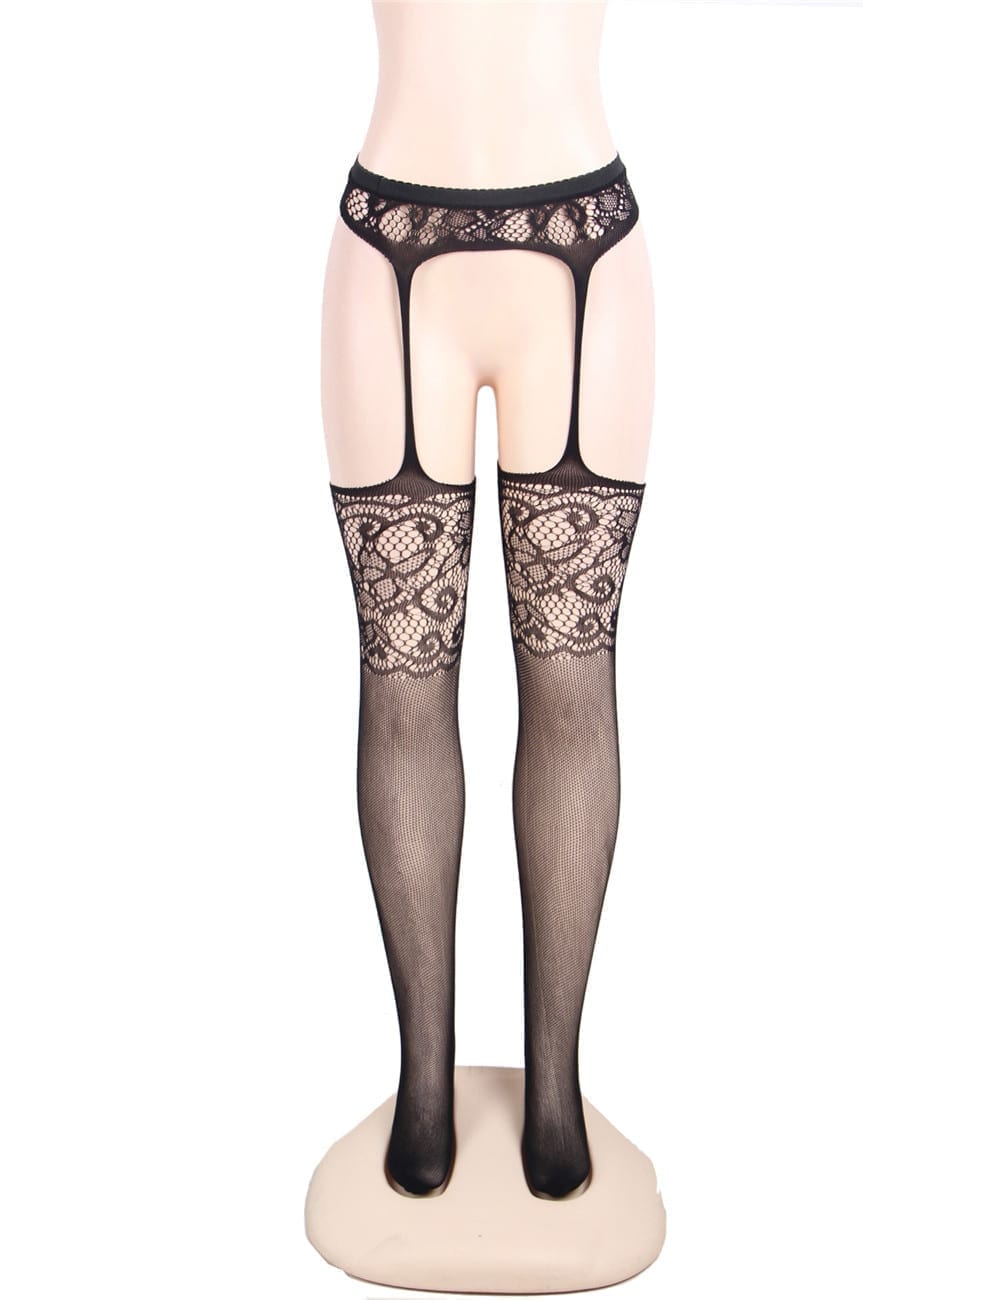 One Piece Lace Suspender and Stockings by My Secret Drawer® mysecretdrawer.co 2